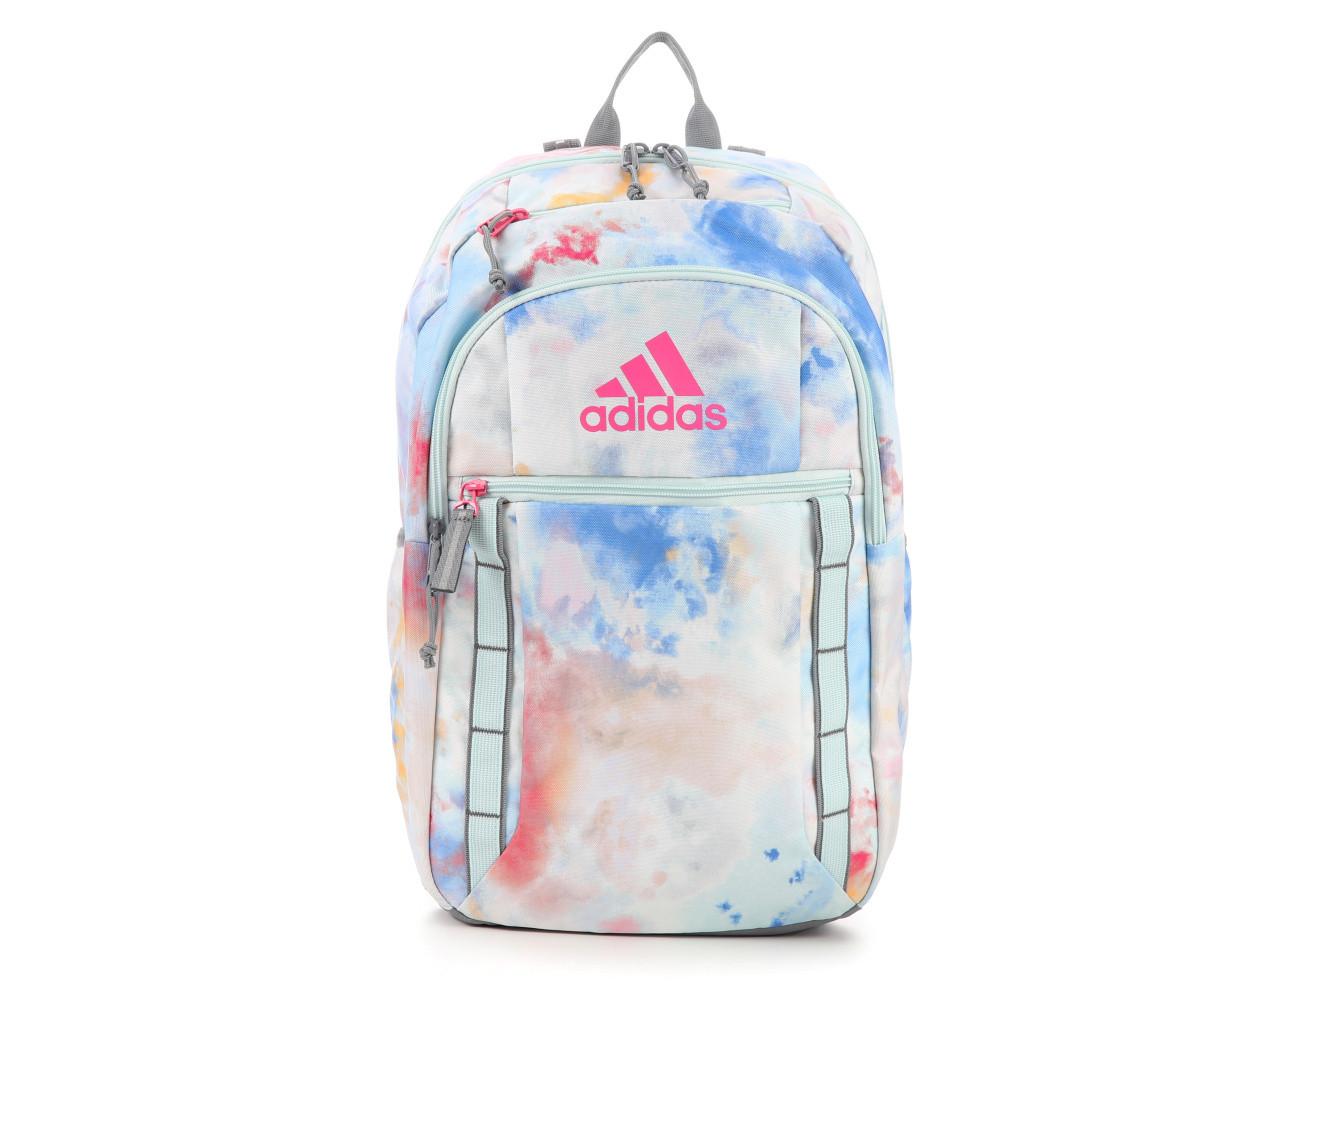 Adidas Excel 7 Backpack